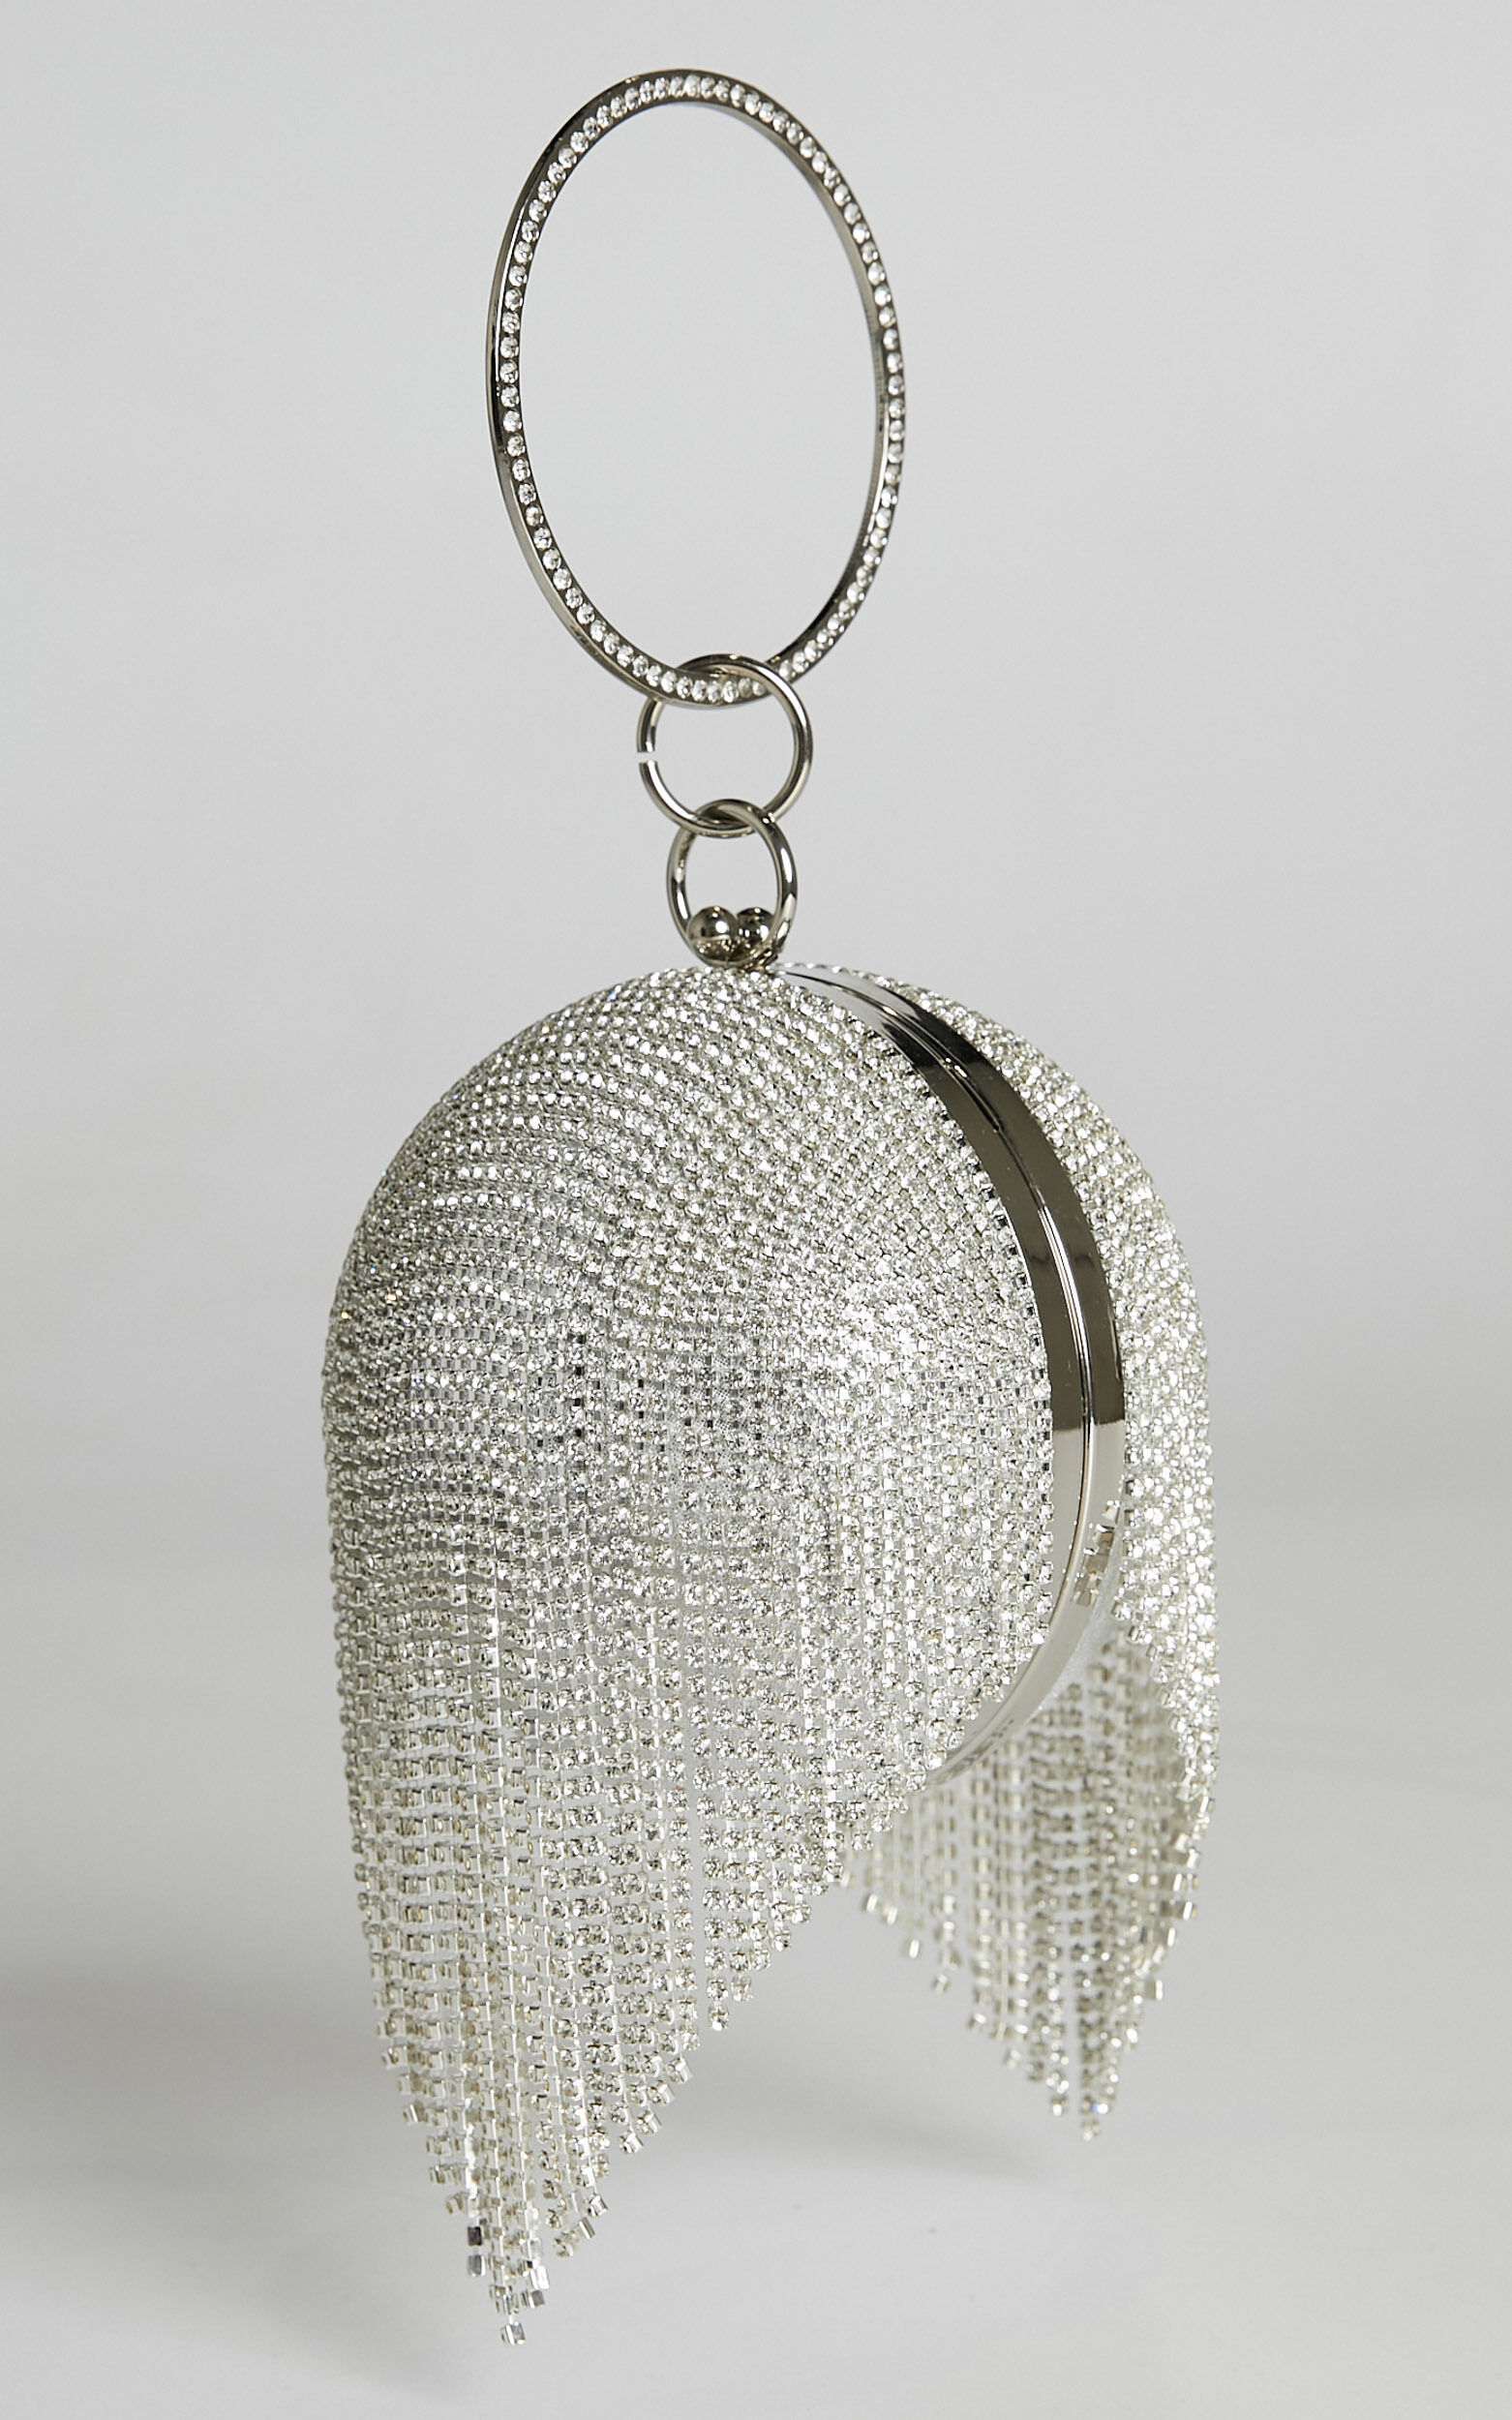 Downeti Diamante Sphere Clutch Bag in Silver - OneSize, SLV1, super-hi-res image number null